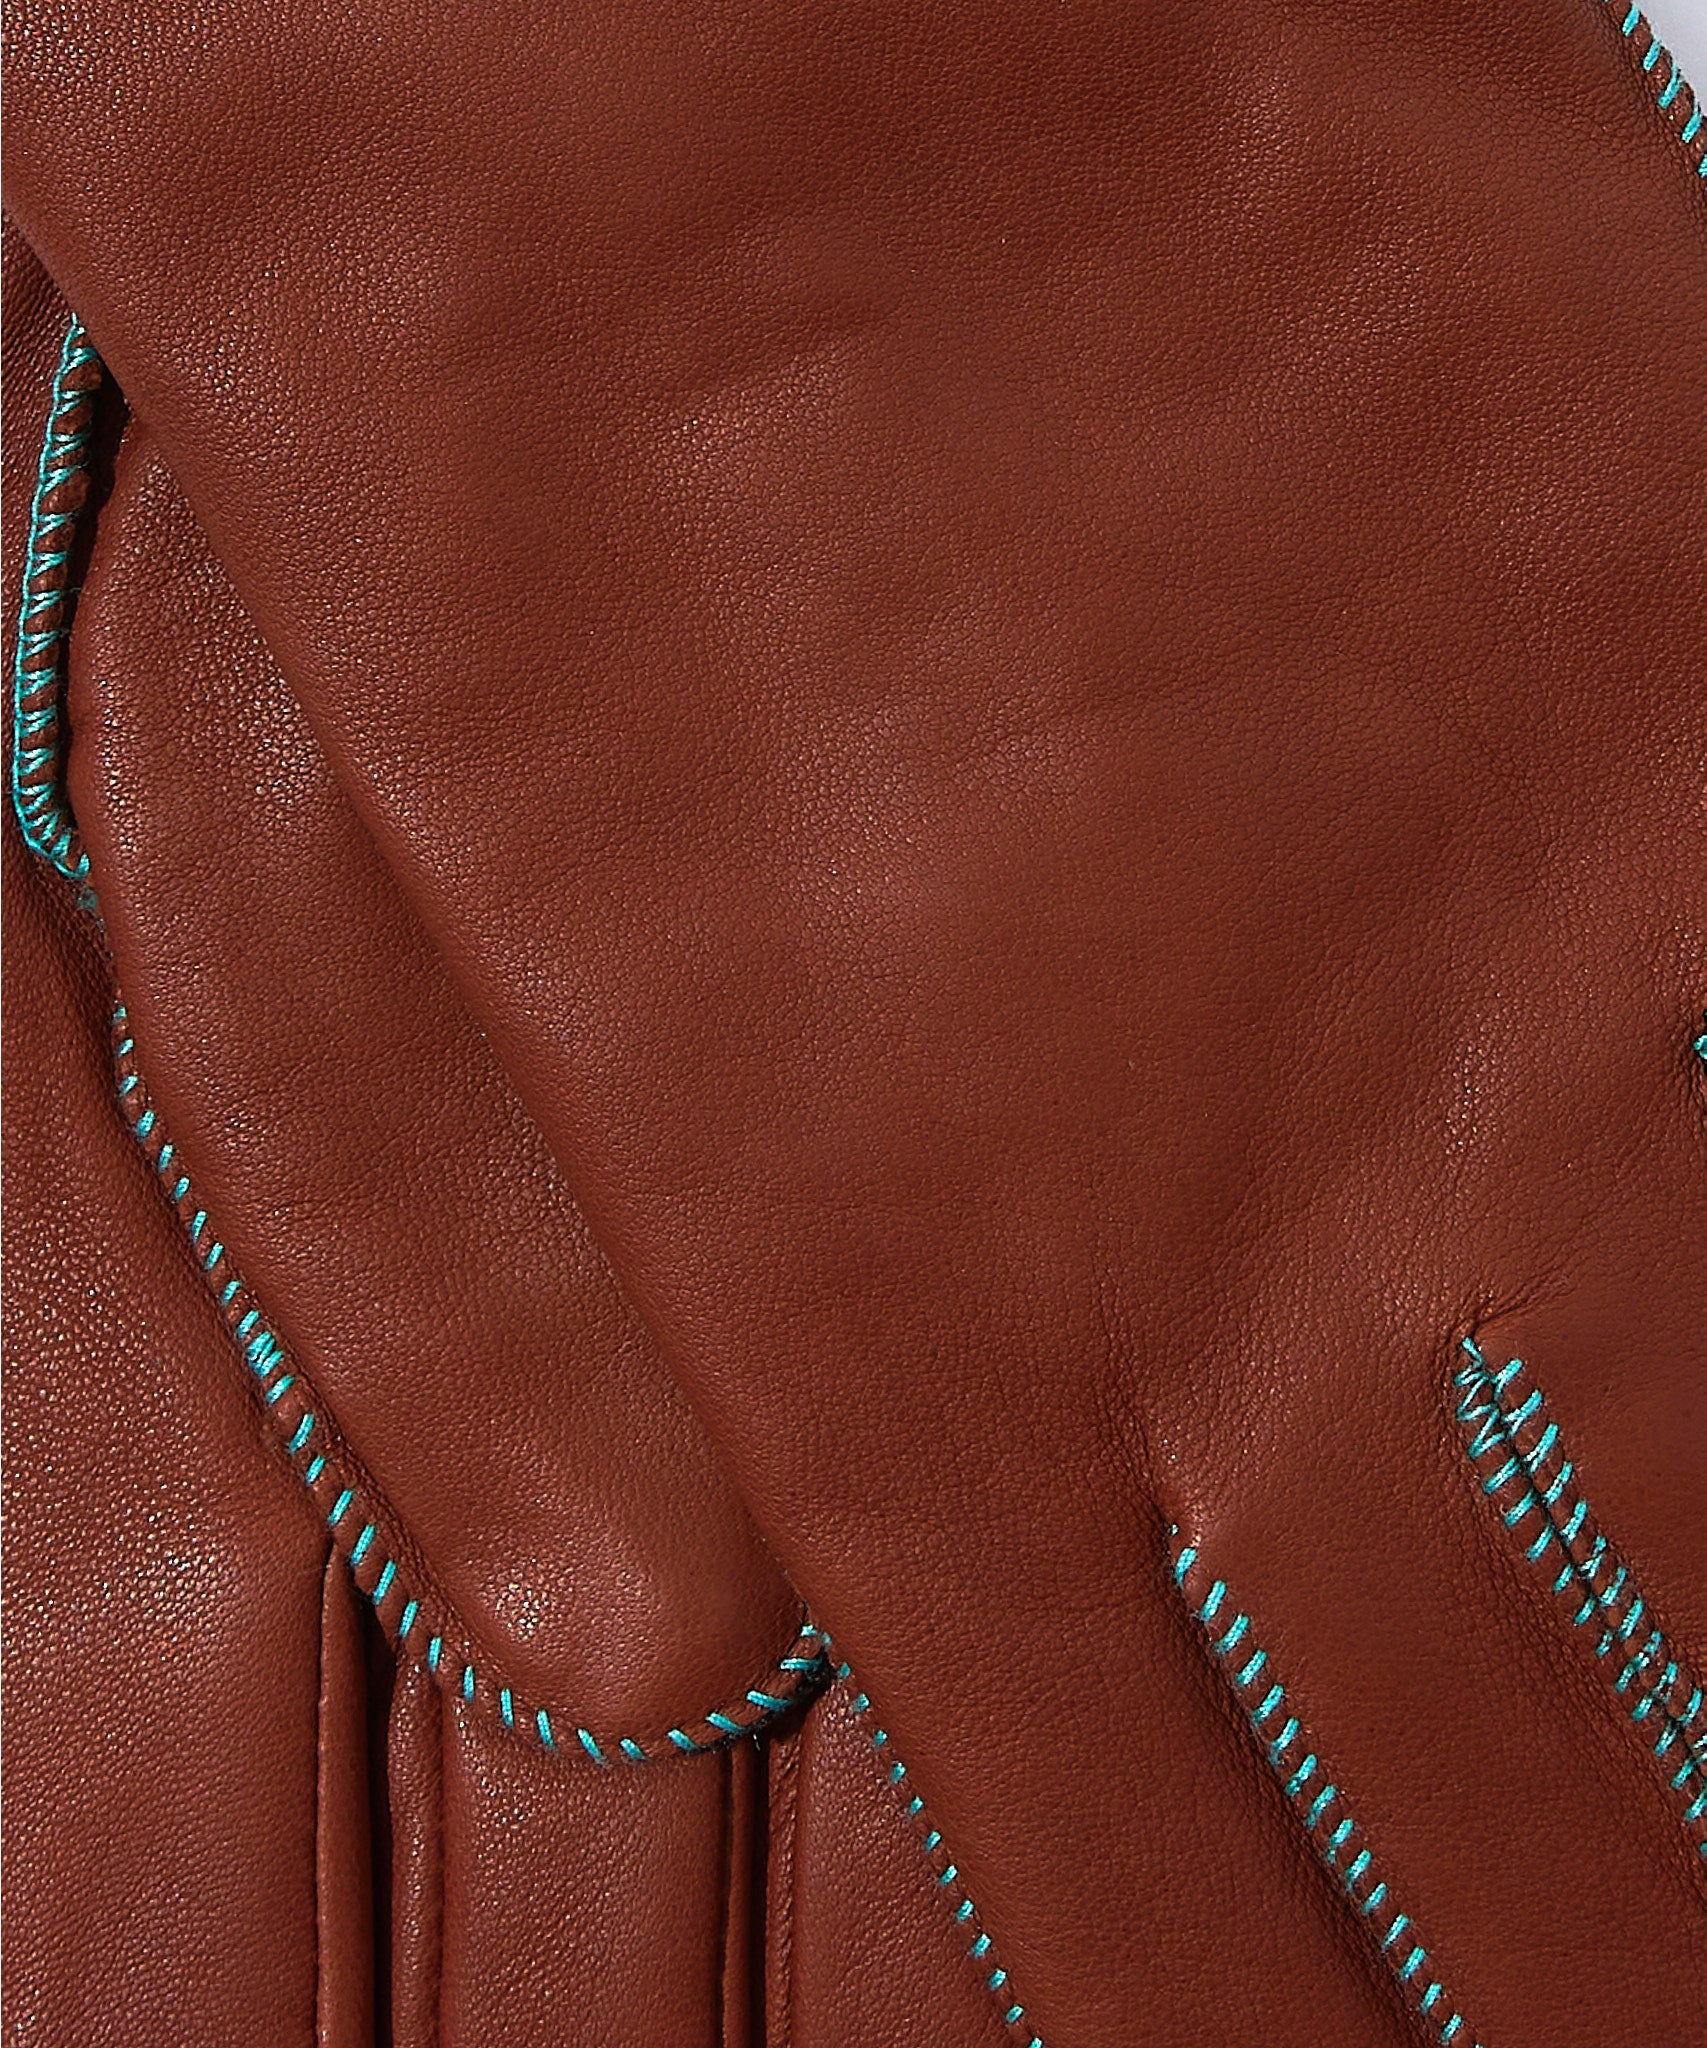 Stitched Leather Gloves